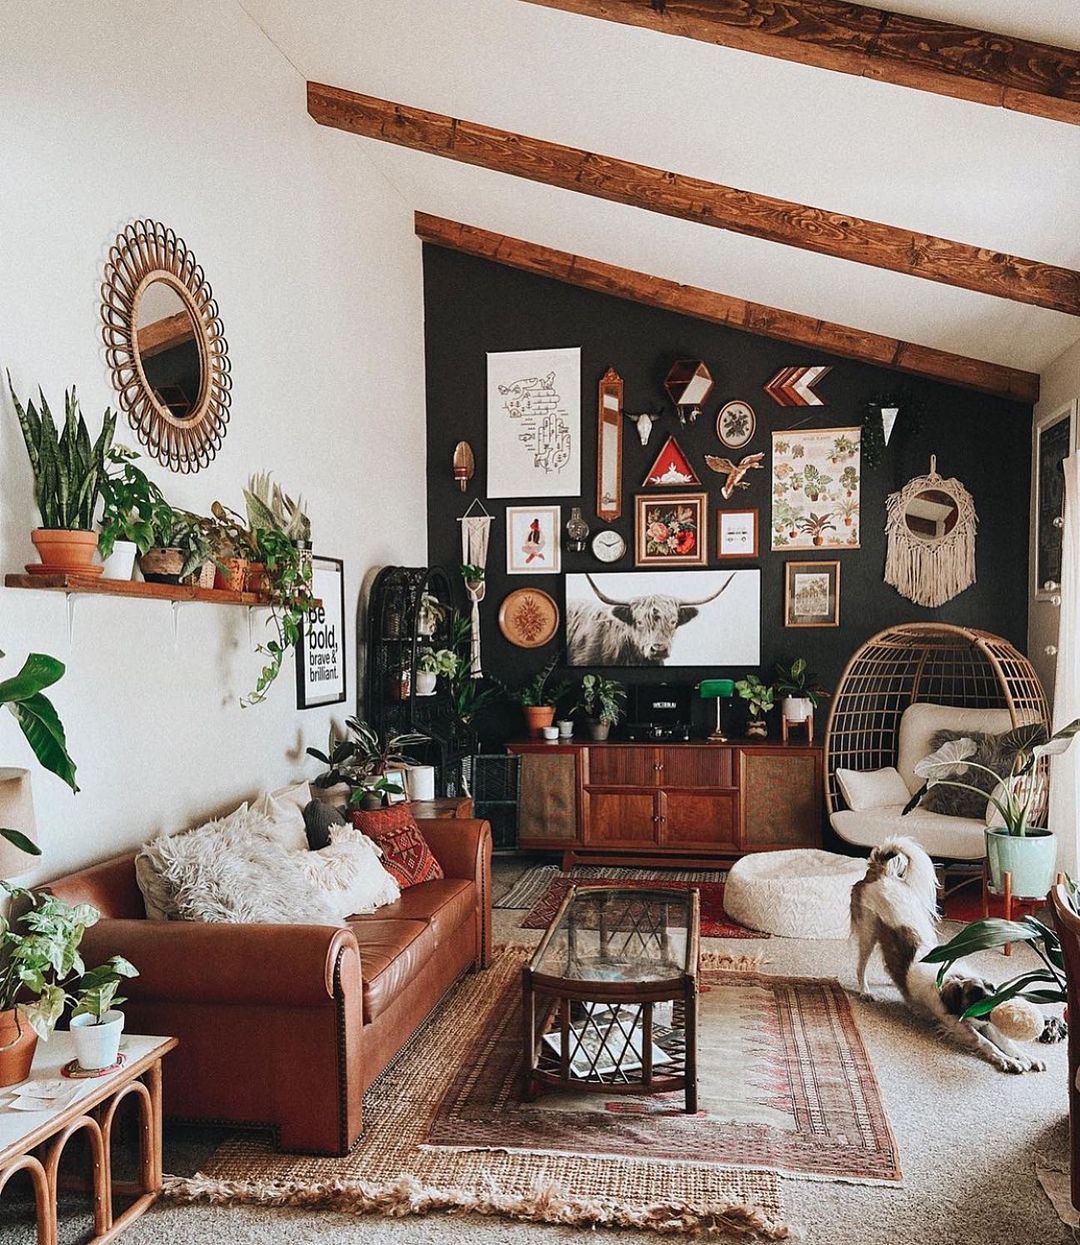 Eclectic Boho Vibes in a Rustic Palette